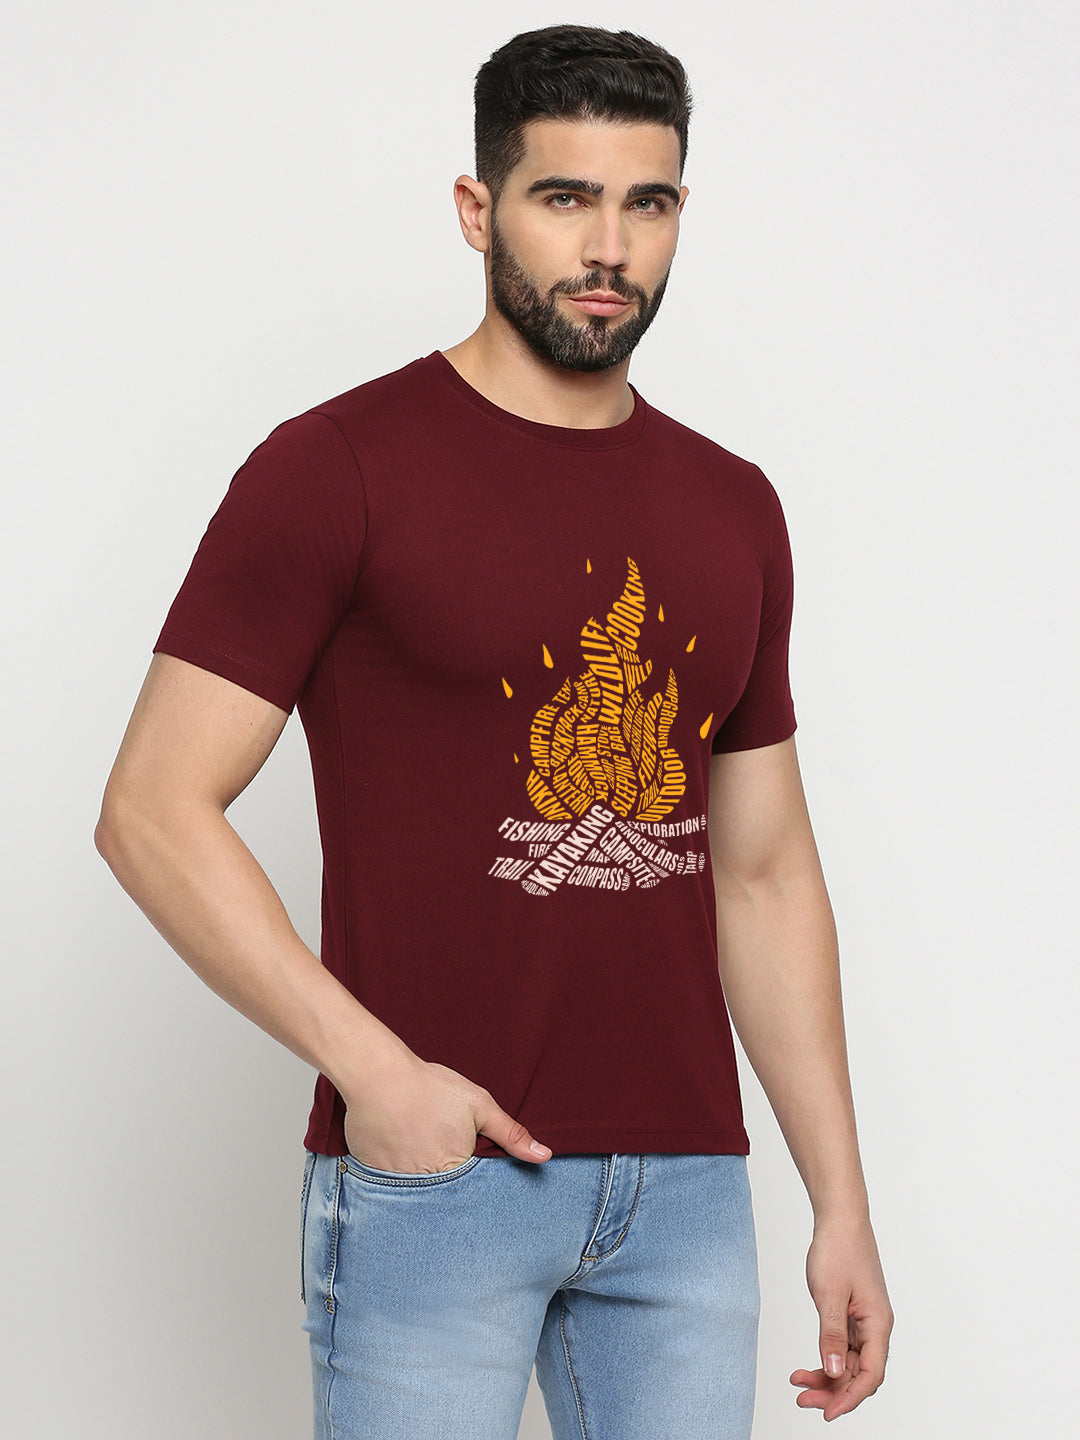 Campfire Typography T-Shirt